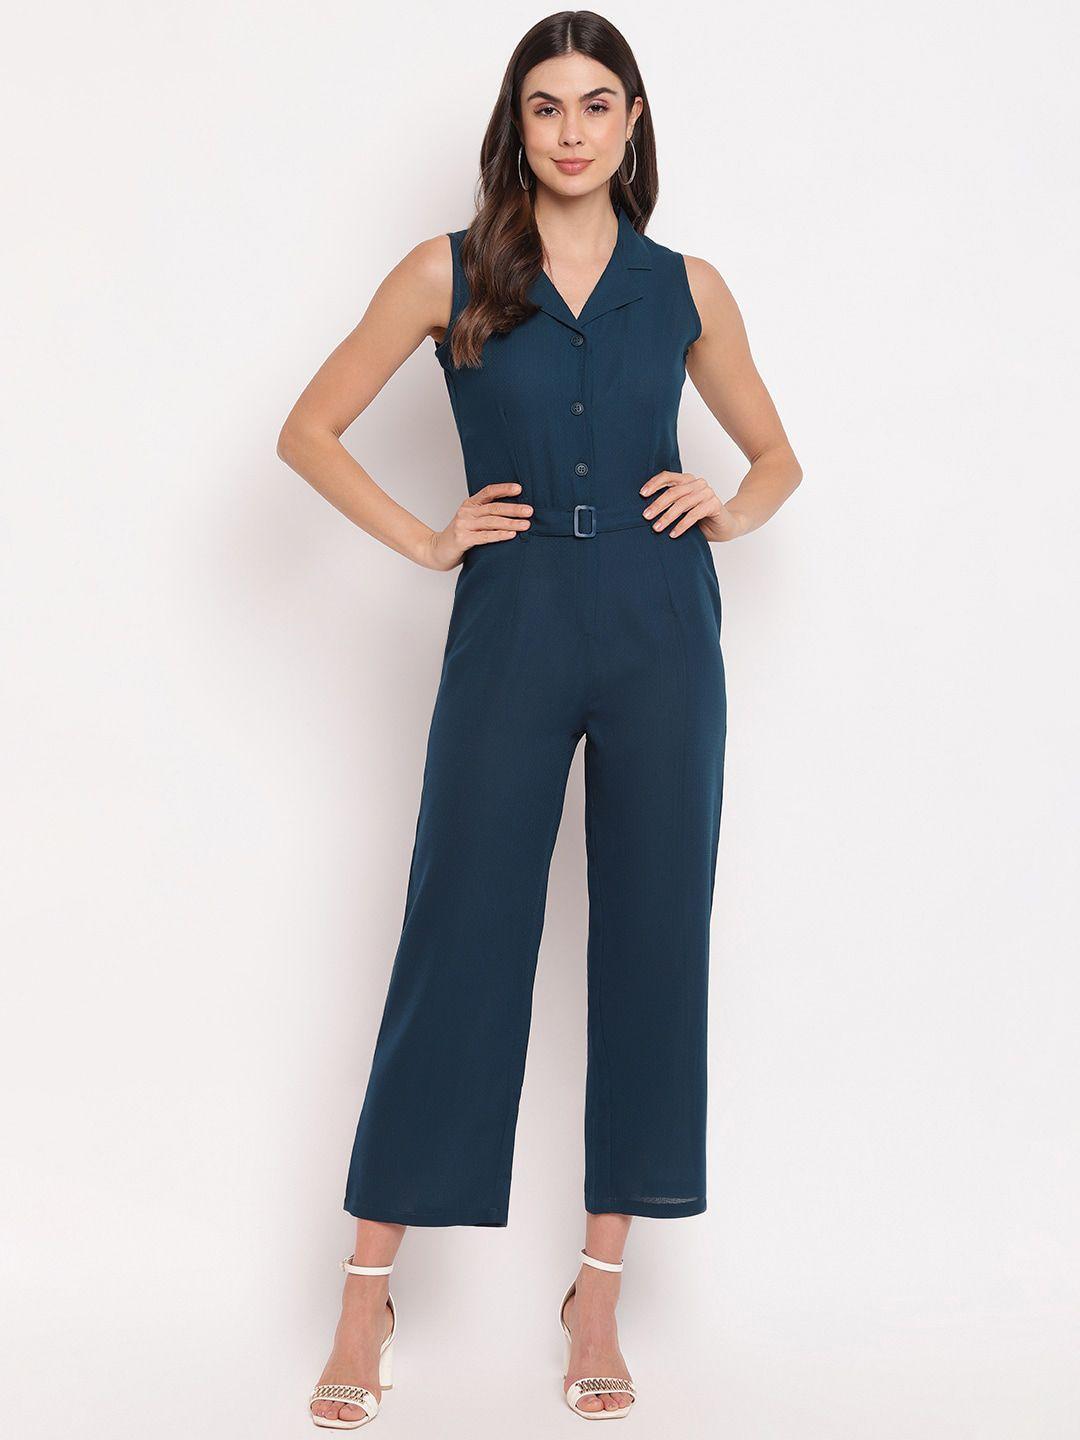 mayra women teal blue solid basic jumpsuit